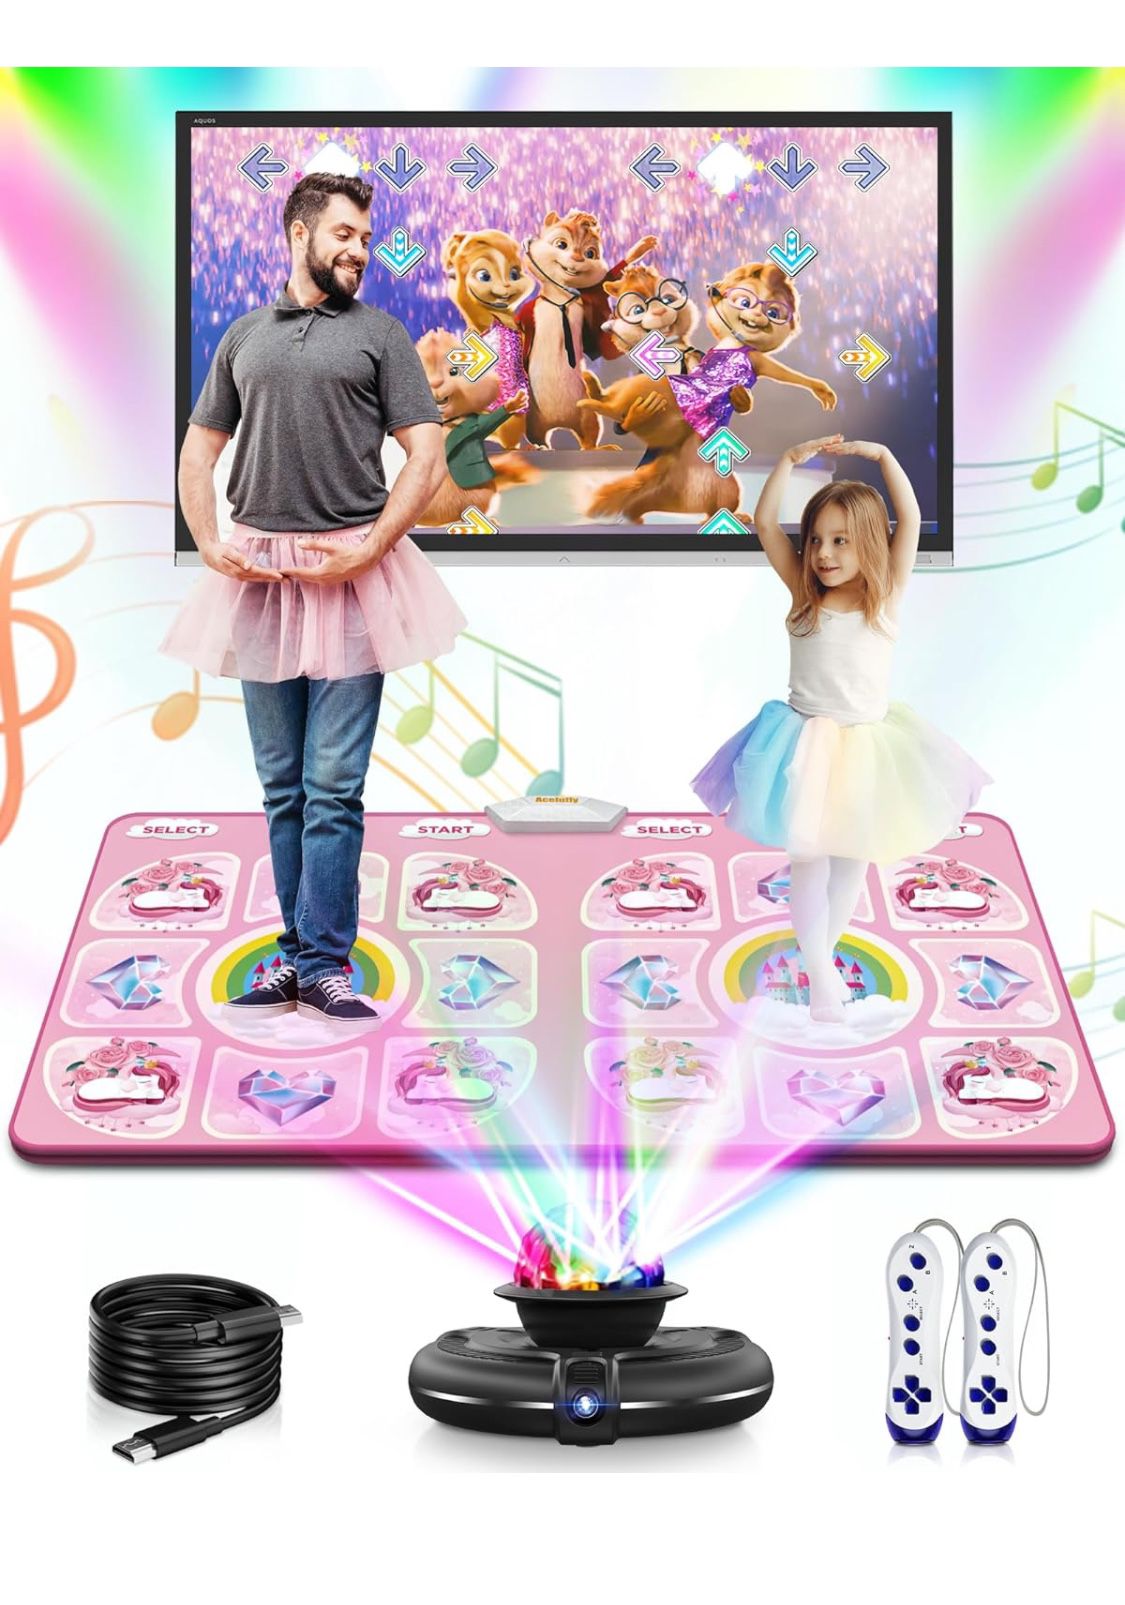 Unicorn Flannel Dance Mat, Electronic Double Dance Mats for TV with Camera, Non-Slip Dance Pad with Wireless Controller, Birthday Gifts for Kids Adult